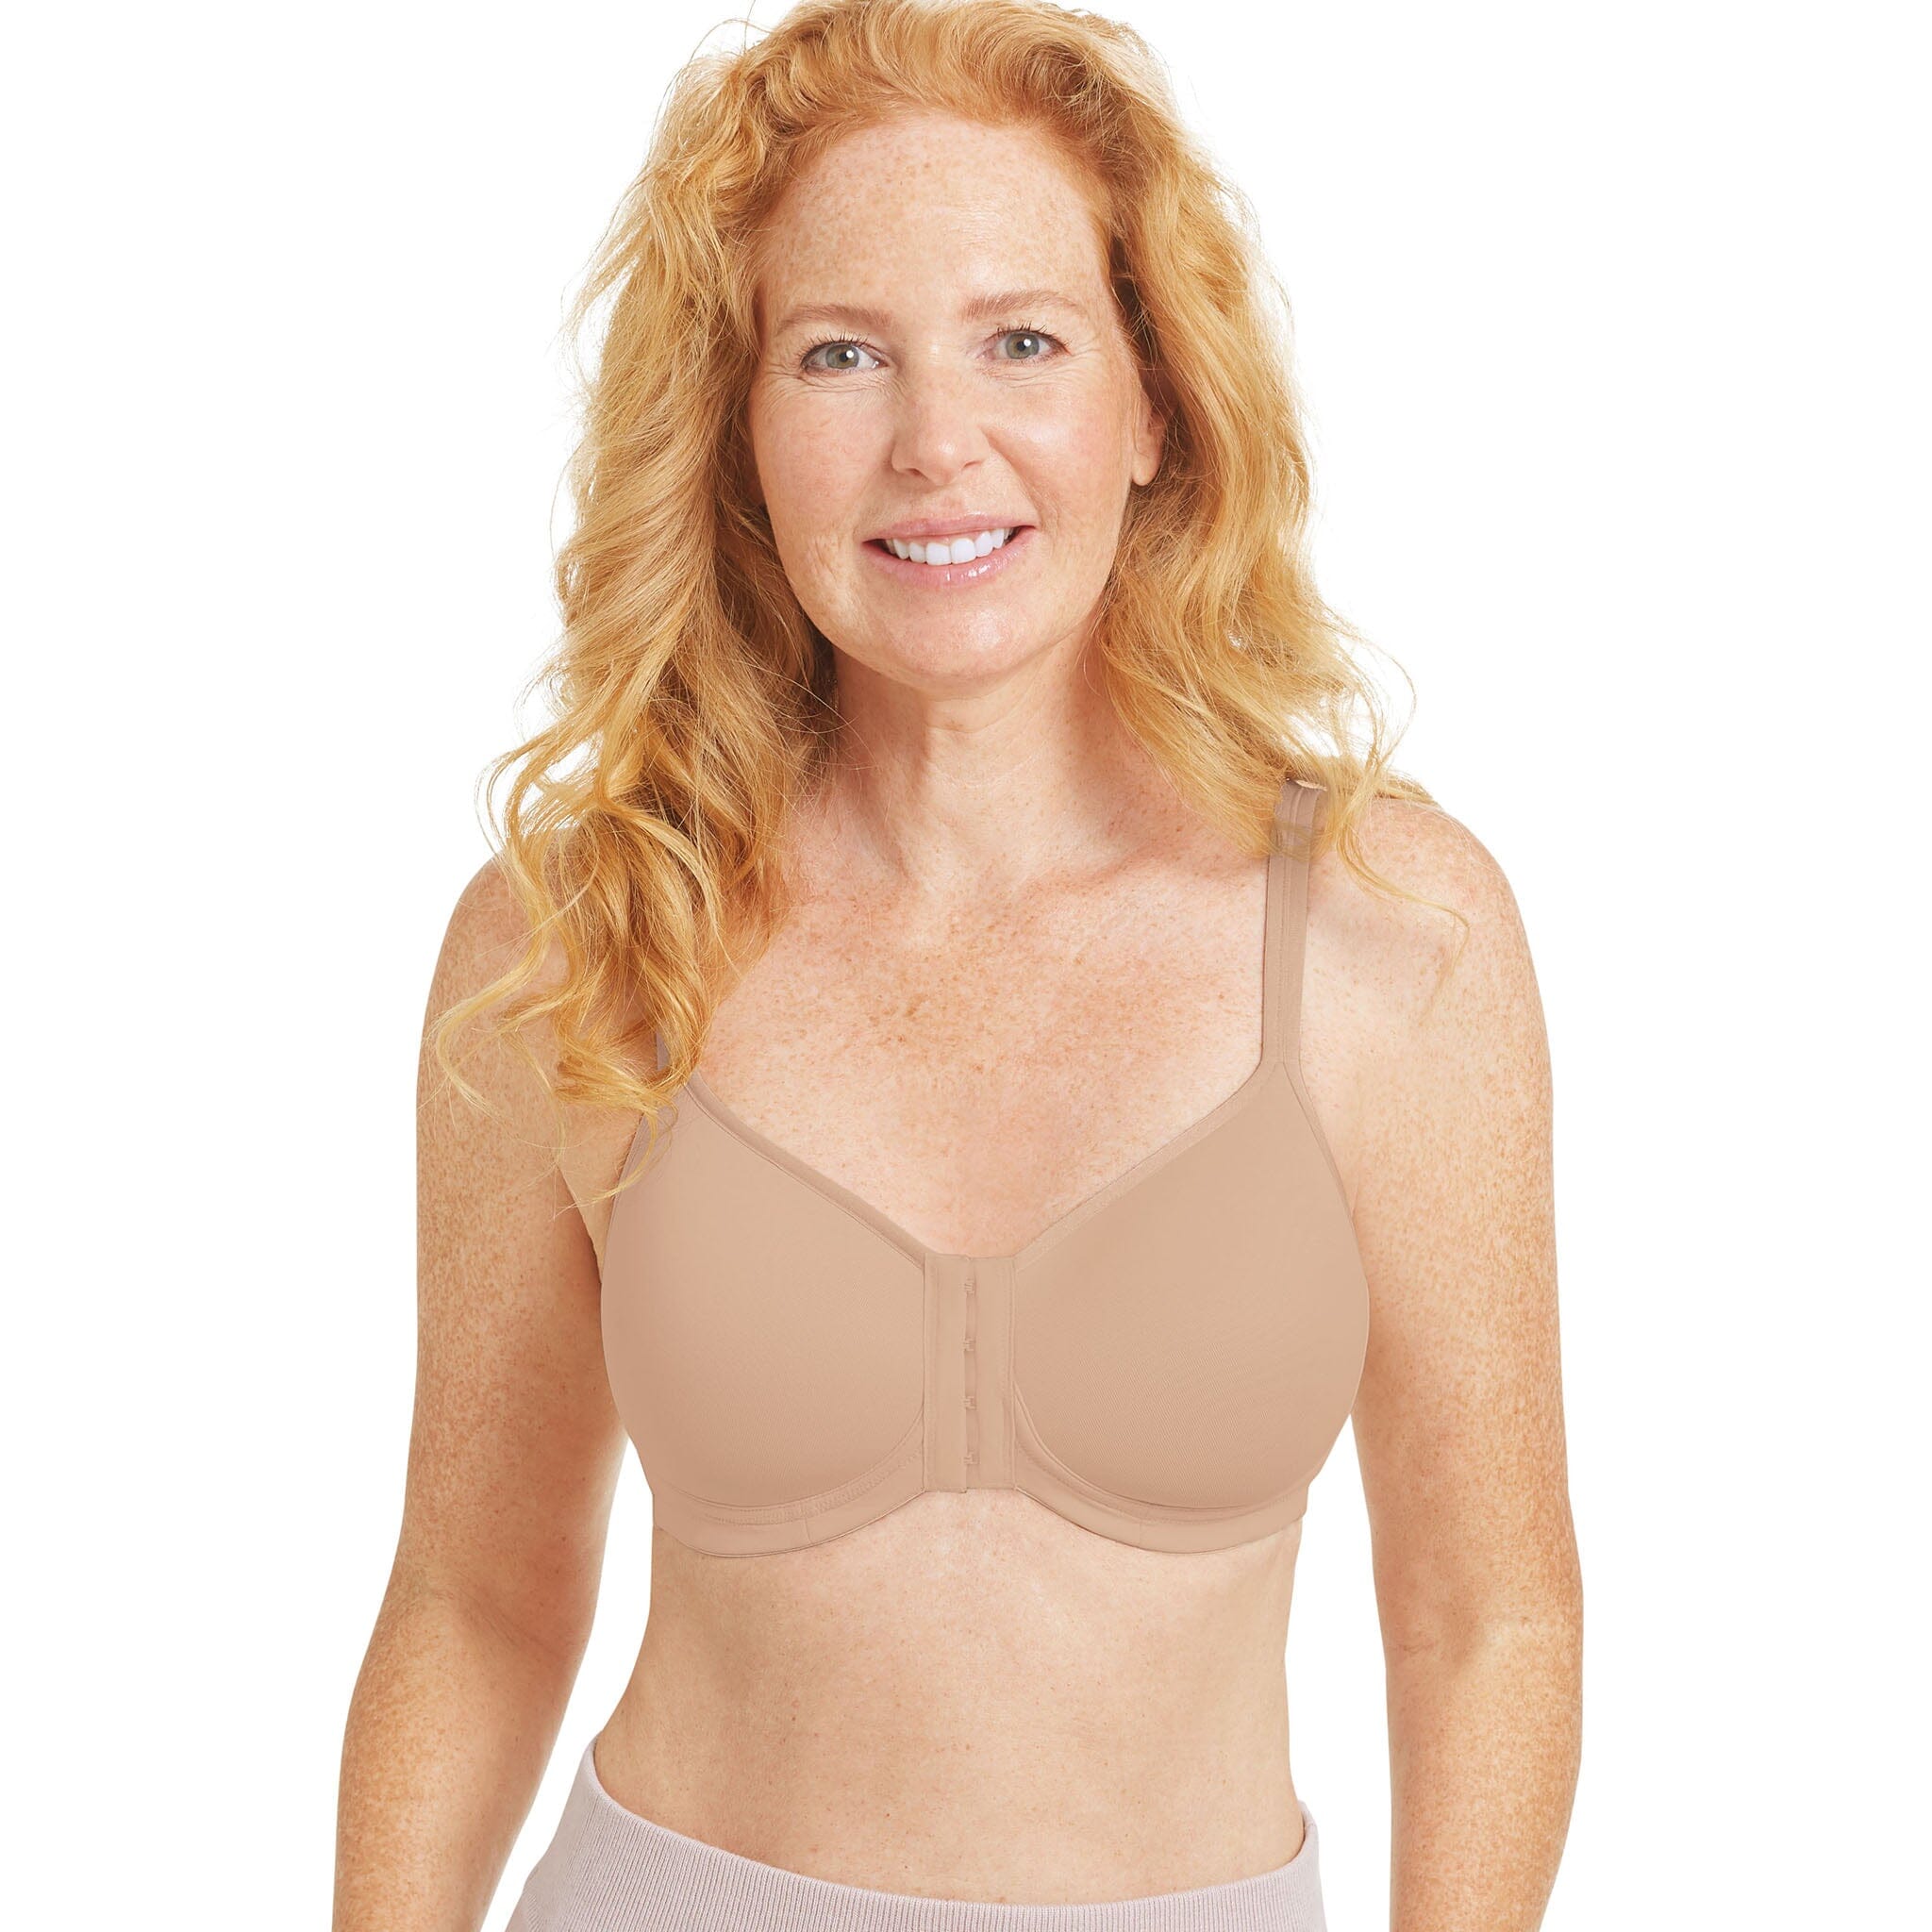 NEXT NUDE UNDERWIRED MOULDED LACE SMOOTH CUP T SHIRT BRA SIZE 36B CUP